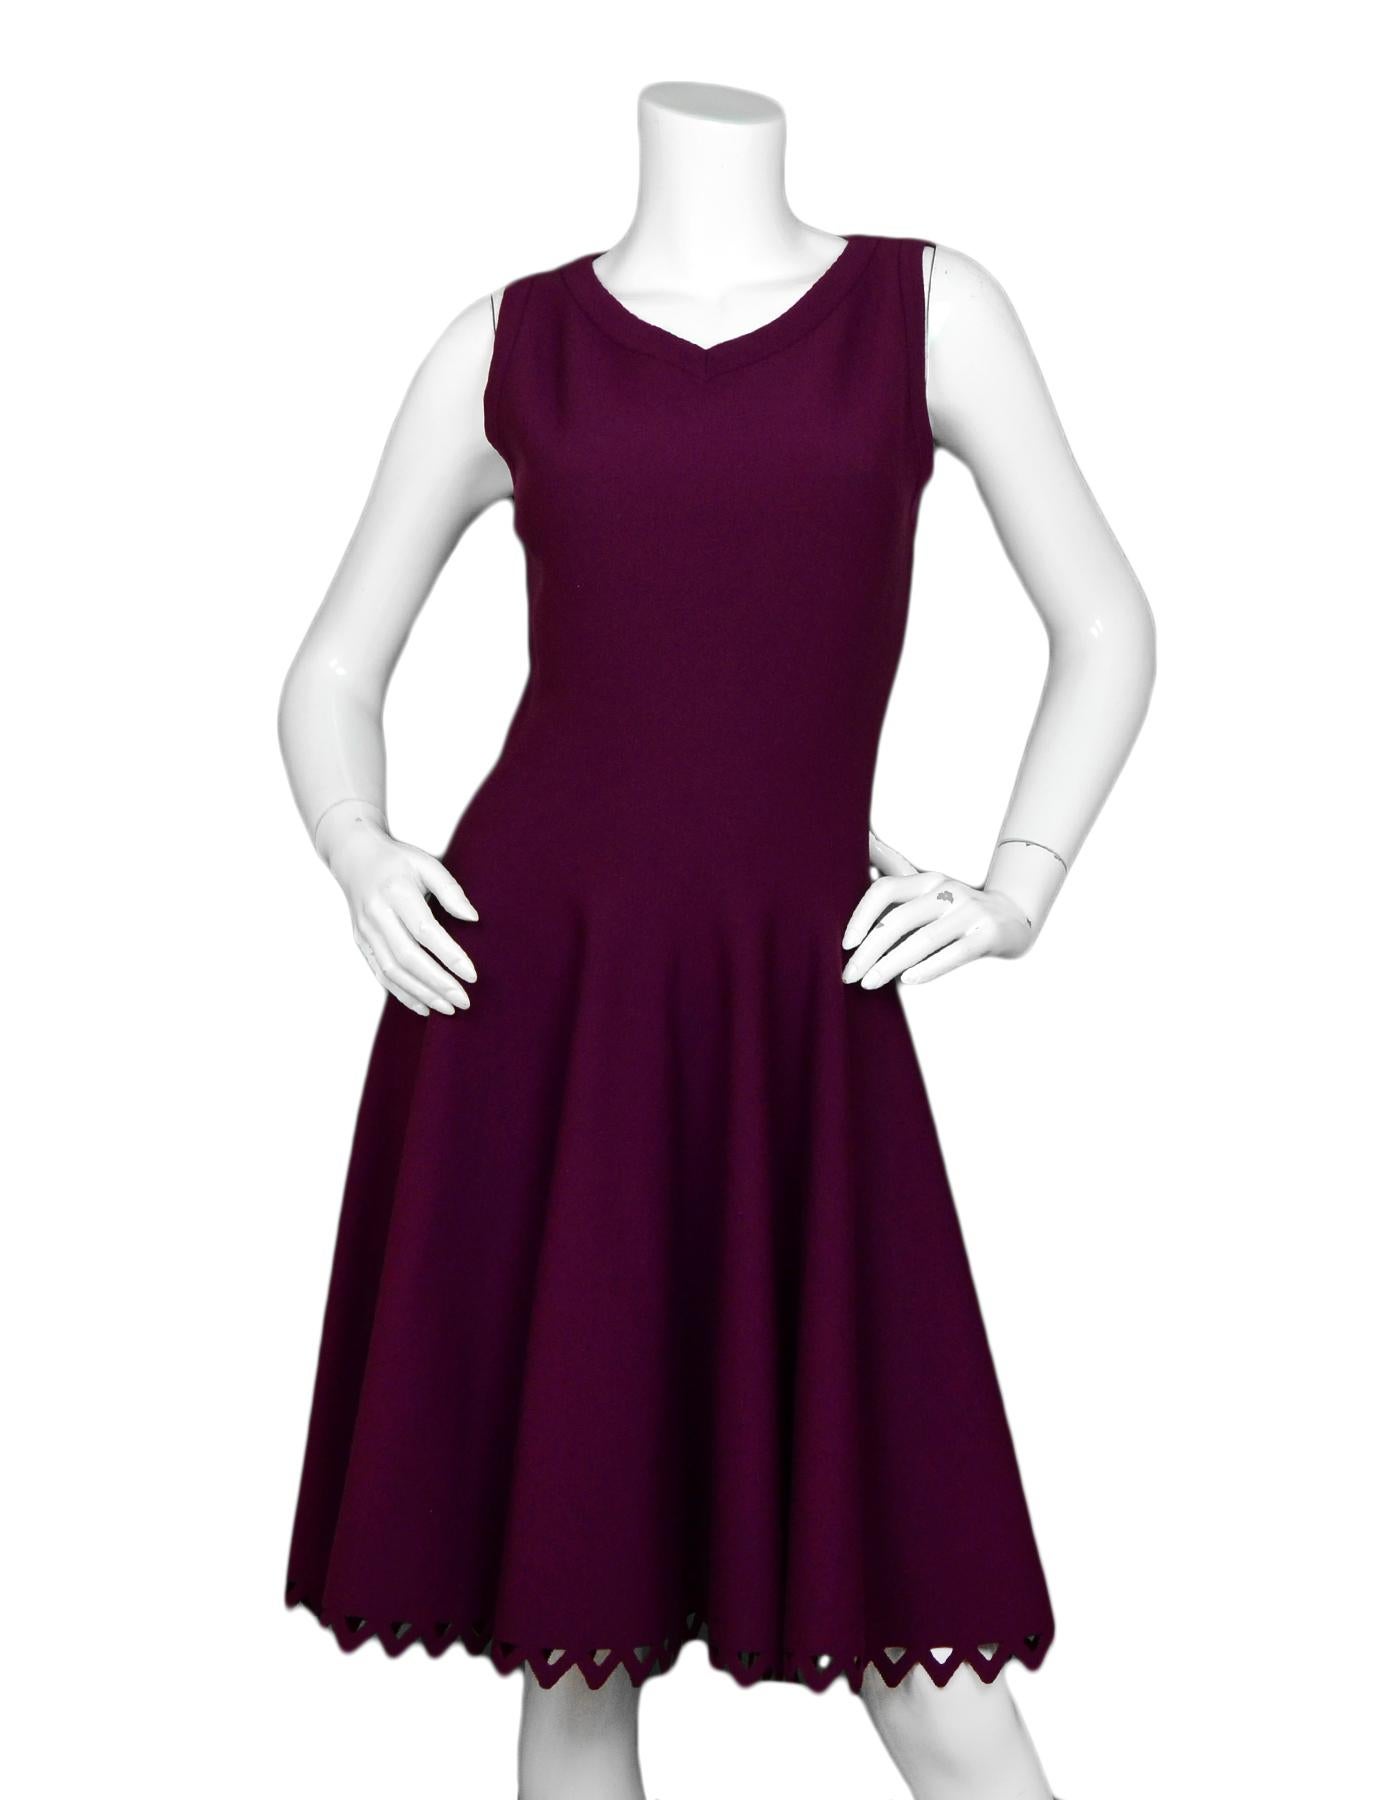 Alaia Raspberry Sleeveless Knit Flare Dress

Color: Raspberry
Materials: Missing composition tag
Opening/Closure: Hidden back zipper 
Overall Condition: Very good pre-owned condition, with size and composition tags missing
Tag Size: Size tag